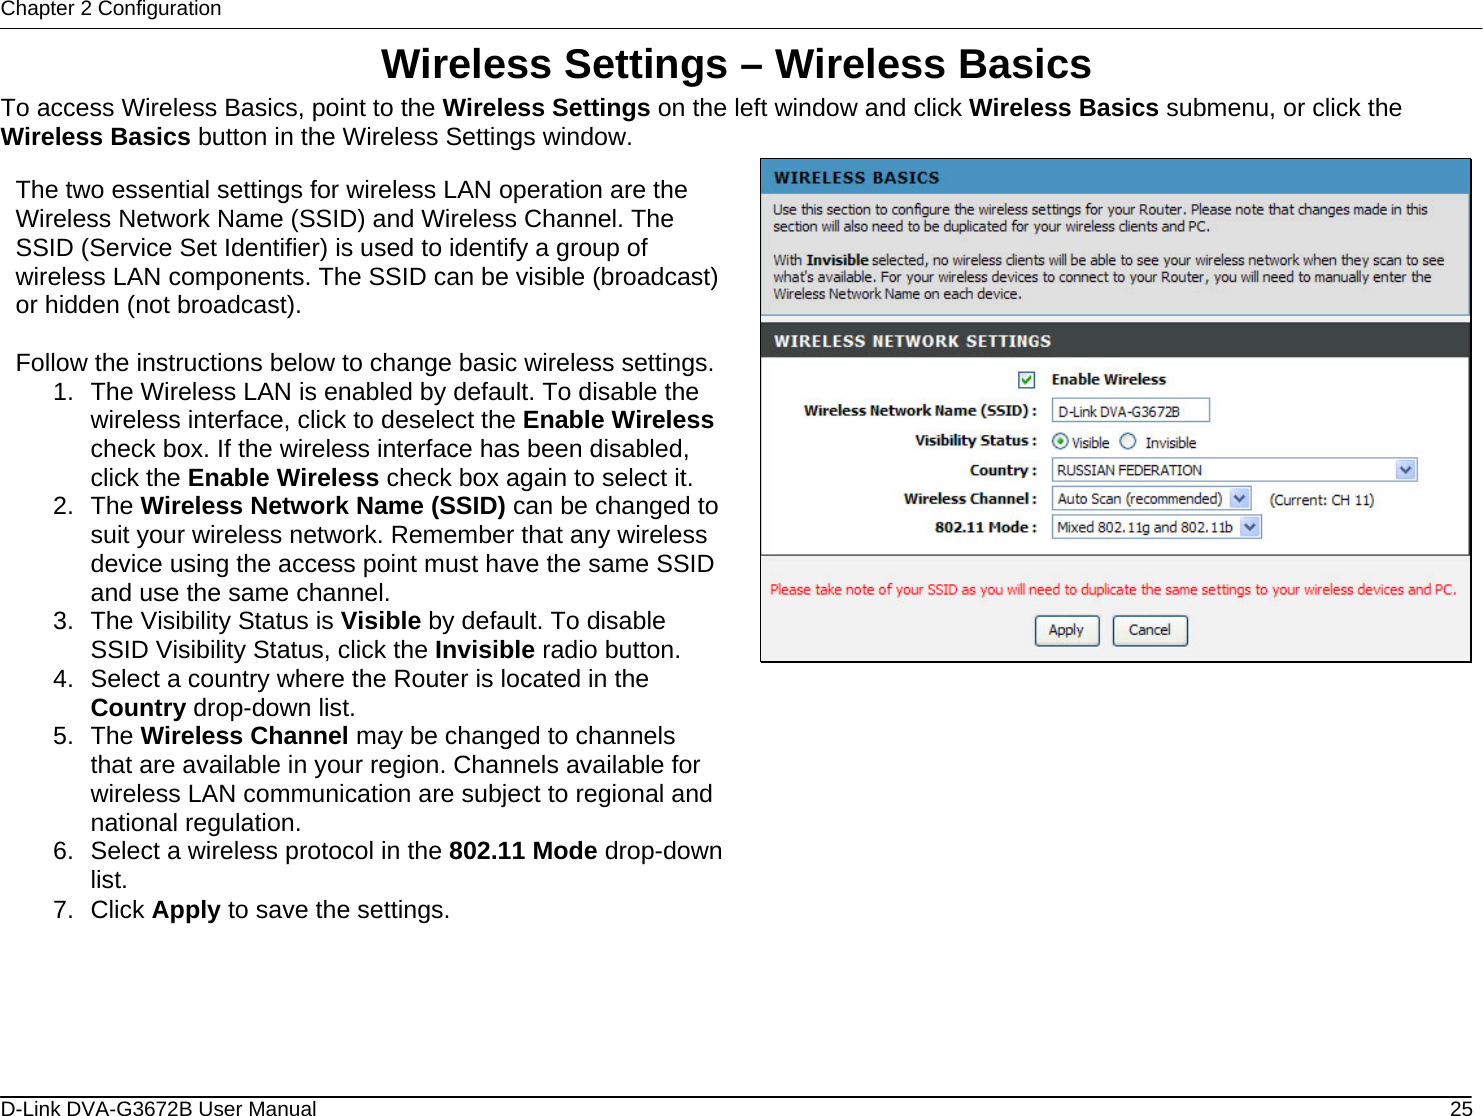 Chapter 2 Configuration Wireless Settings – Wireless Basics To access Wireless Basics, point to the Wireless Settings on the left window and click Wireless Basics submenu, or click the Wireless Basics button in the Wireless Settings window.  The two essential settings for wireless LAN operation are the Wireless Network Name (SSID) and Wireless Channel. The SSID (Service Set Identifier) is used to identify a group of wireless LAN components. The SSID can be visible (broadcast) or hidden (not broadcast).  Follow the instructions below to change basic wireless settings.1.  The Wireless LAN is enabled by default. To disable the wireless interface, click to deselect the Enable Wireless check box. If the wireless interface has been disabled, click the Enable Wireless check box again to select it. 2. The Wireless Network Name (SSID) can be changed to suit your wireless network. Remember that any wireless device using the access point must have the same SSID and use the same channel. 3.  The Visibility Status is Visible by default. To disable SSID Visibility Status, click the Invisible radio button. 4.  Select a country where the Router is located in the Country drop-down list. 5. The Wireless Channel may be changed to channels that are available in your region. Channels available for wireless LAN communication are subject to regional and national regulation. 6.  Select a wireless protocol in the 802.11 Mode drop-down list. 7. Click Apply to save the settings.               D-Link DVA-G3672B User Manual  25